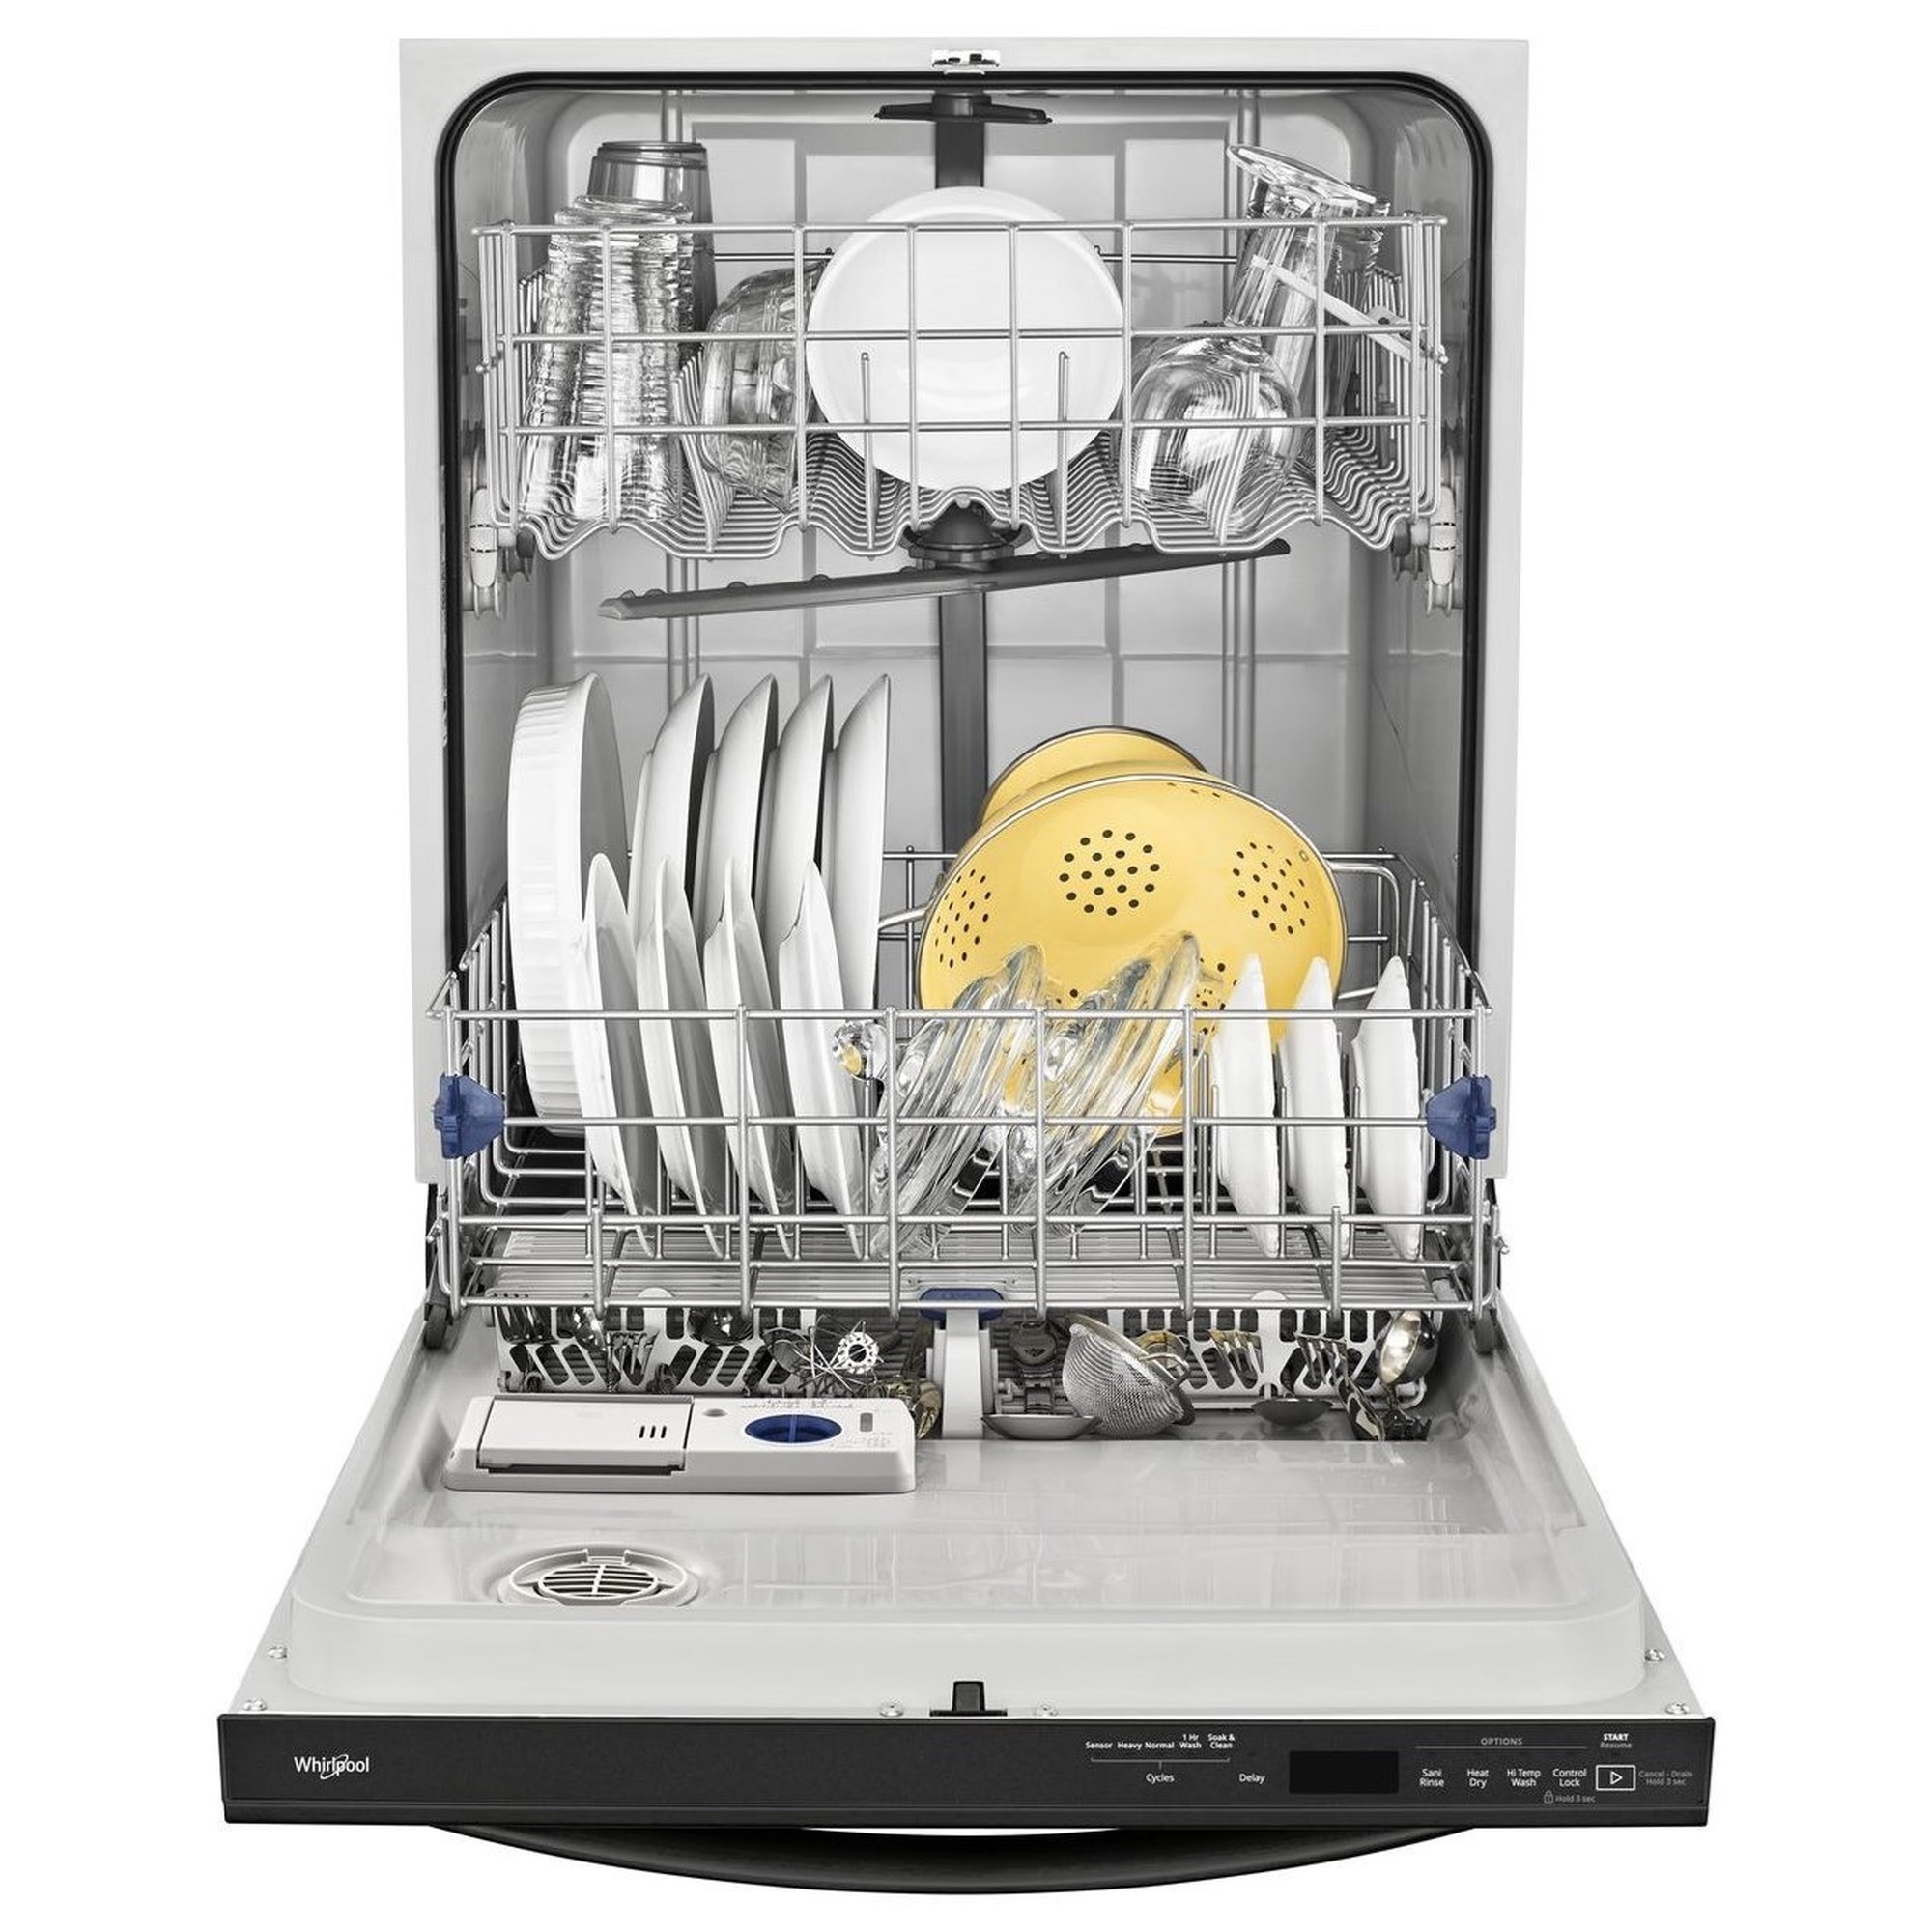 WDF518SAHB by Whirlpool - Small-Space Compact Dishwasher with